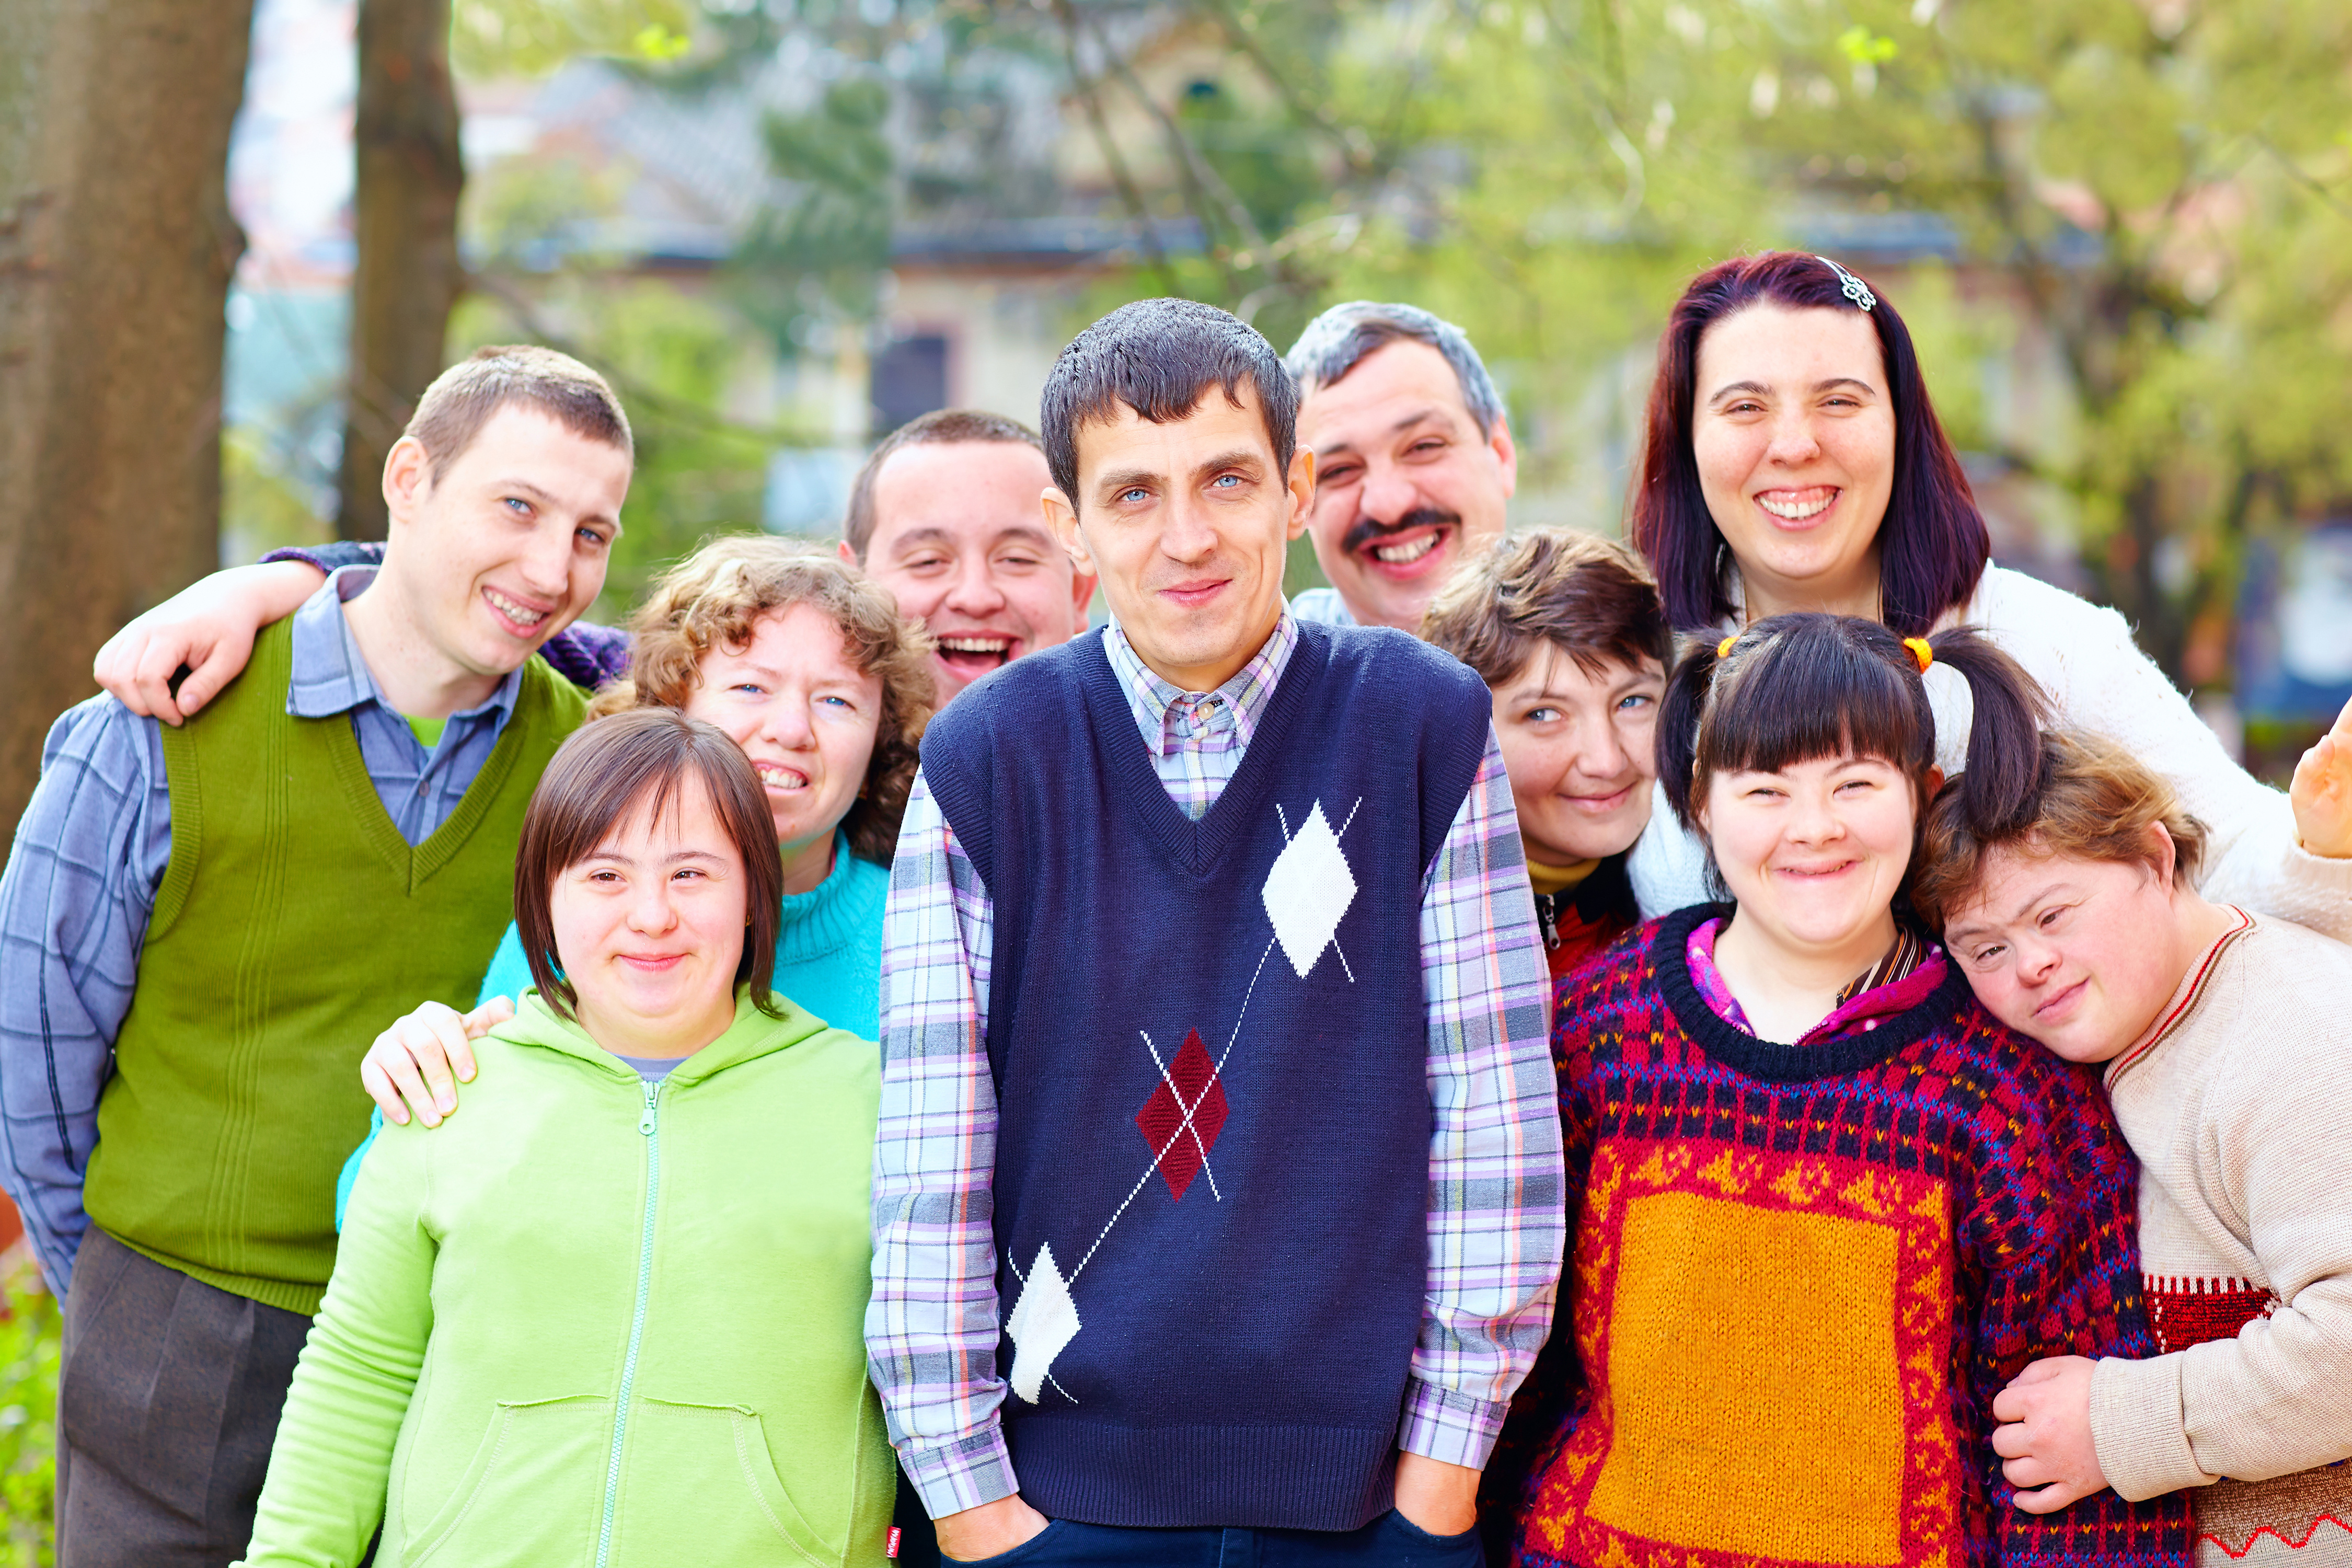 picture of a group of smiling people with varying abilities